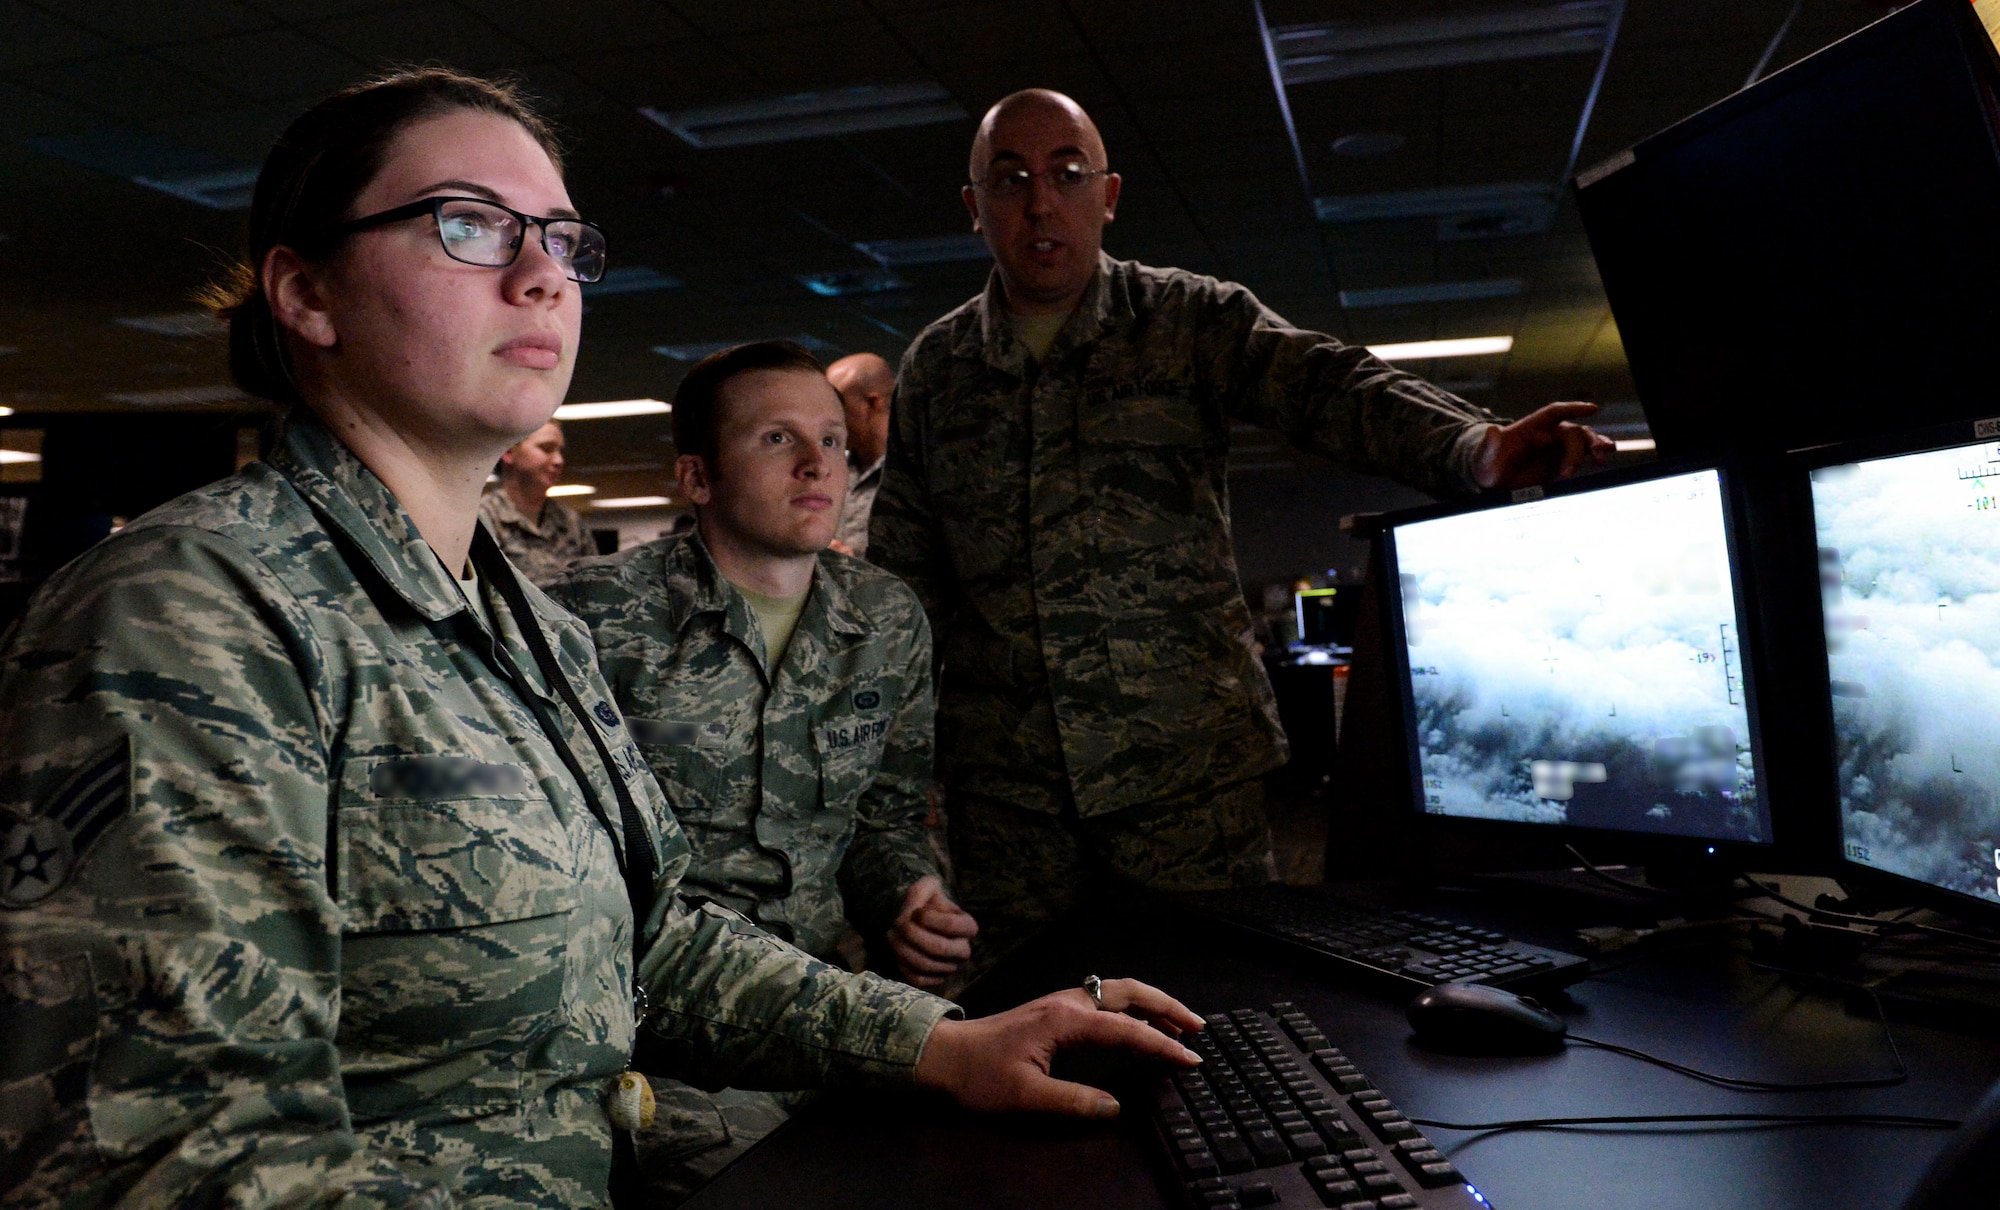 Airmen from the 480th Intelligence, Surveillance and Reconnaissance Wing perform their jobs at Joint Base Langley-Eustis, Virginia. An Airmen Resiliency Team stays embedded with the 480th ISR Wing during the COVID-19 pandemic to provide mental, medical and spiritual care to help Airmen cope with their high stress duties. (U.S. Air Force photo by Senior Airman Nicholas Byers) (This photo has been altered for security purposes by blurring out identification badges)